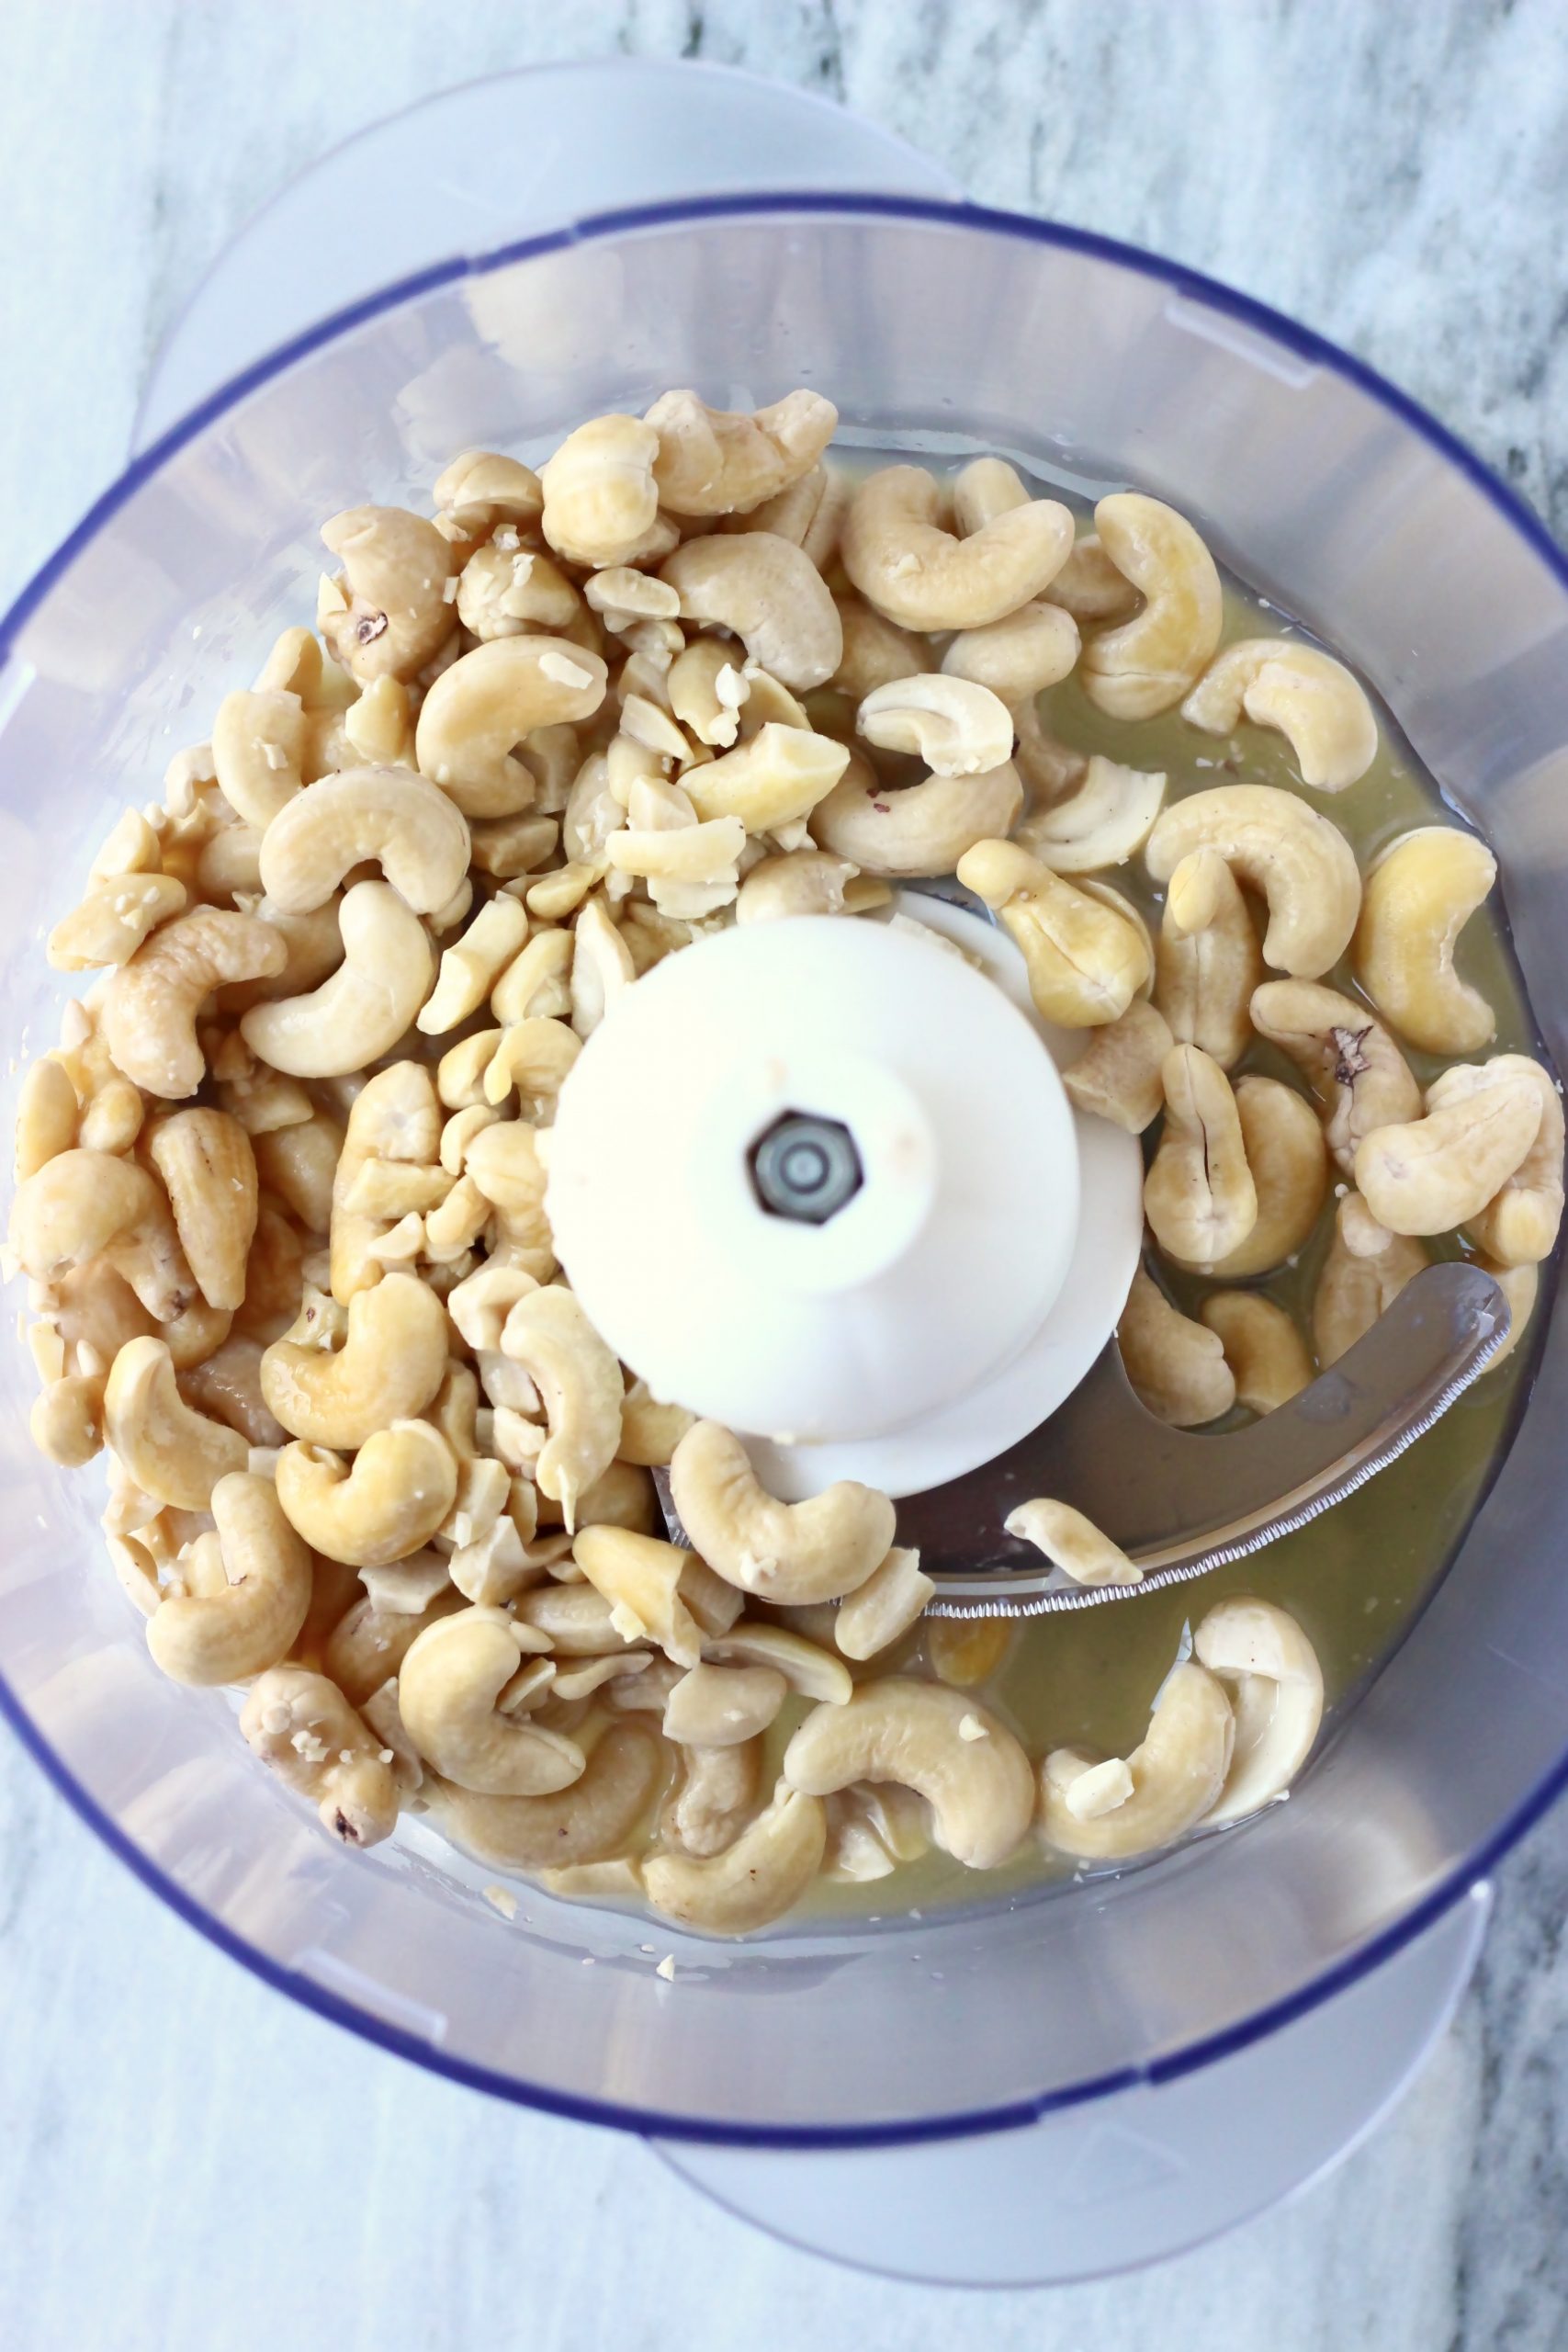 Cashew nuts, lemon juice and maple syrup in a food processor